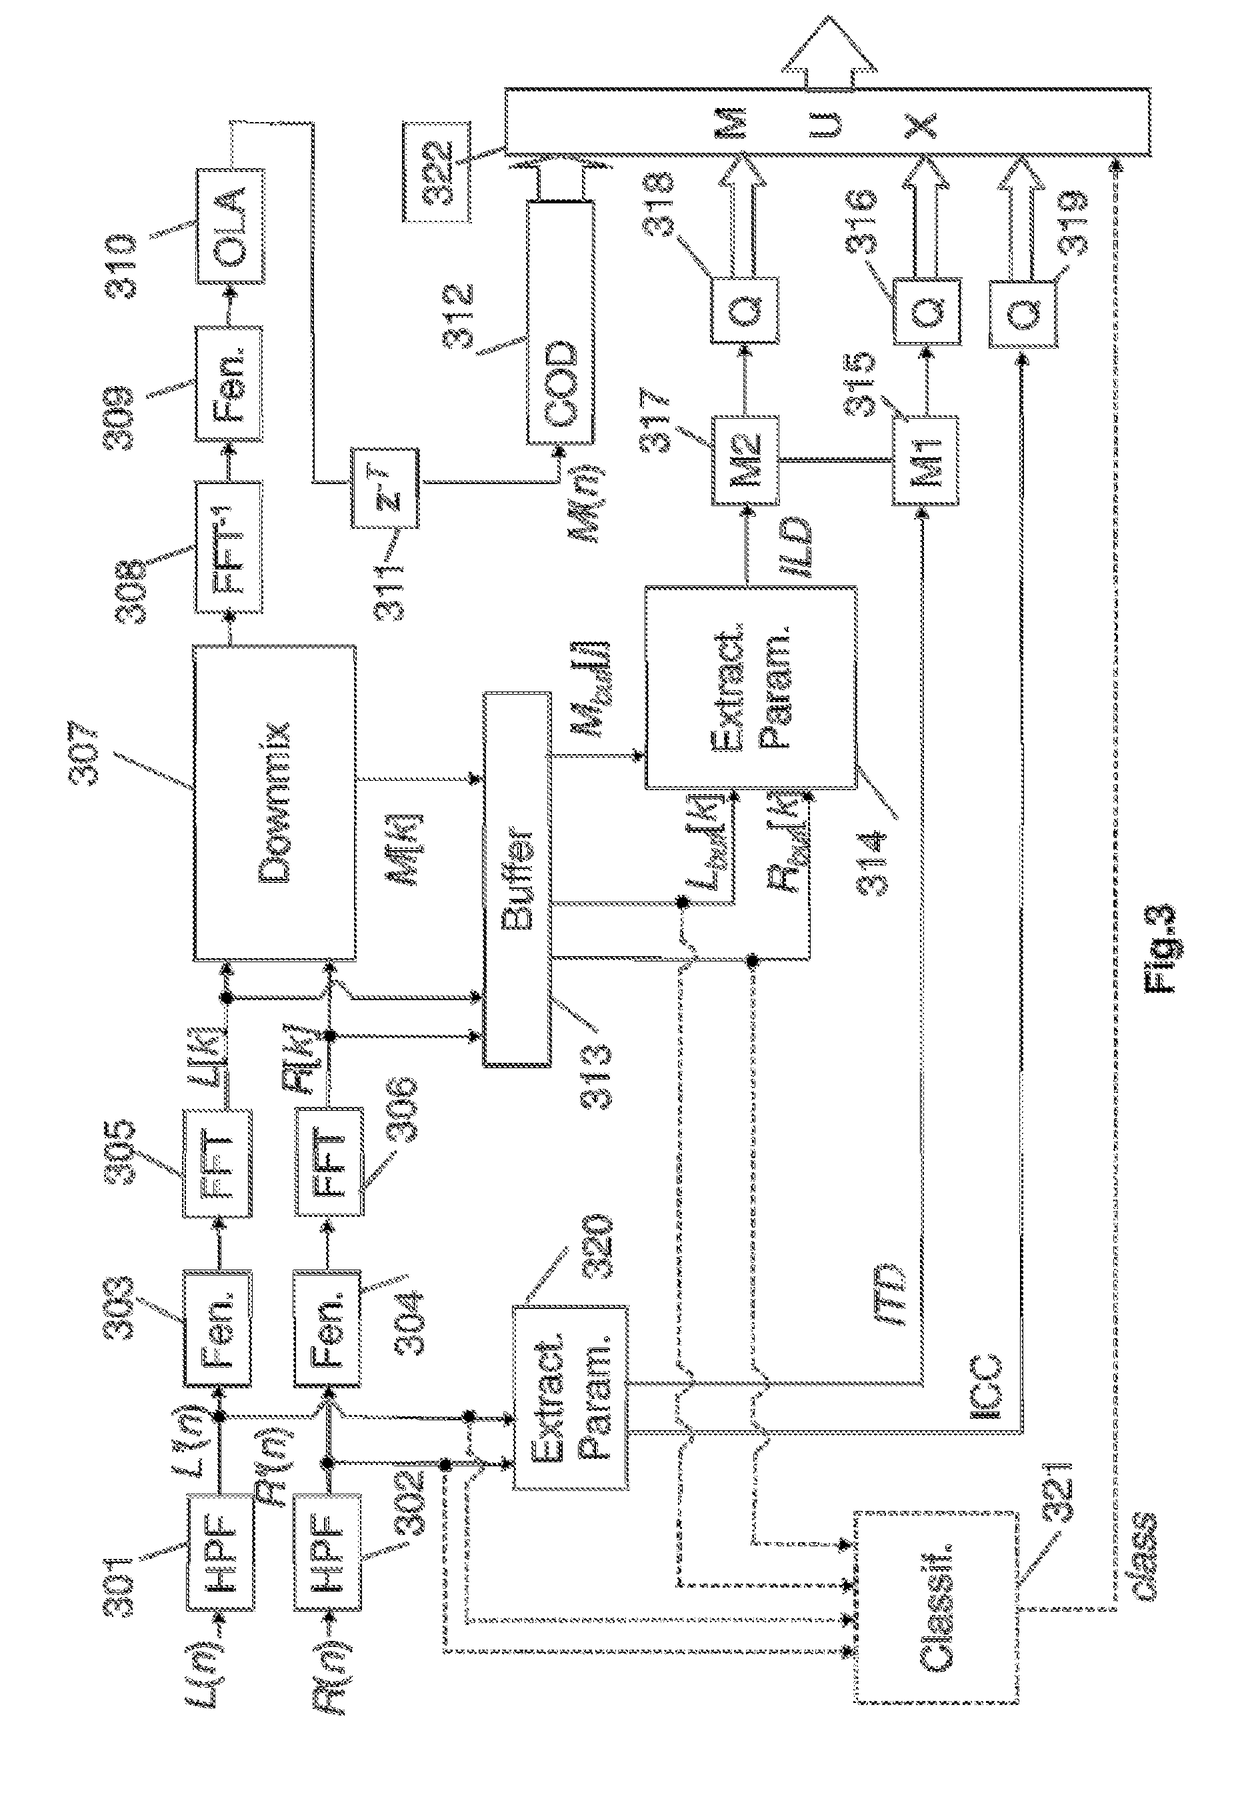 Optimized coding and decoding of spatialization information for the parametric coding and decoding of a multichannel audio signal